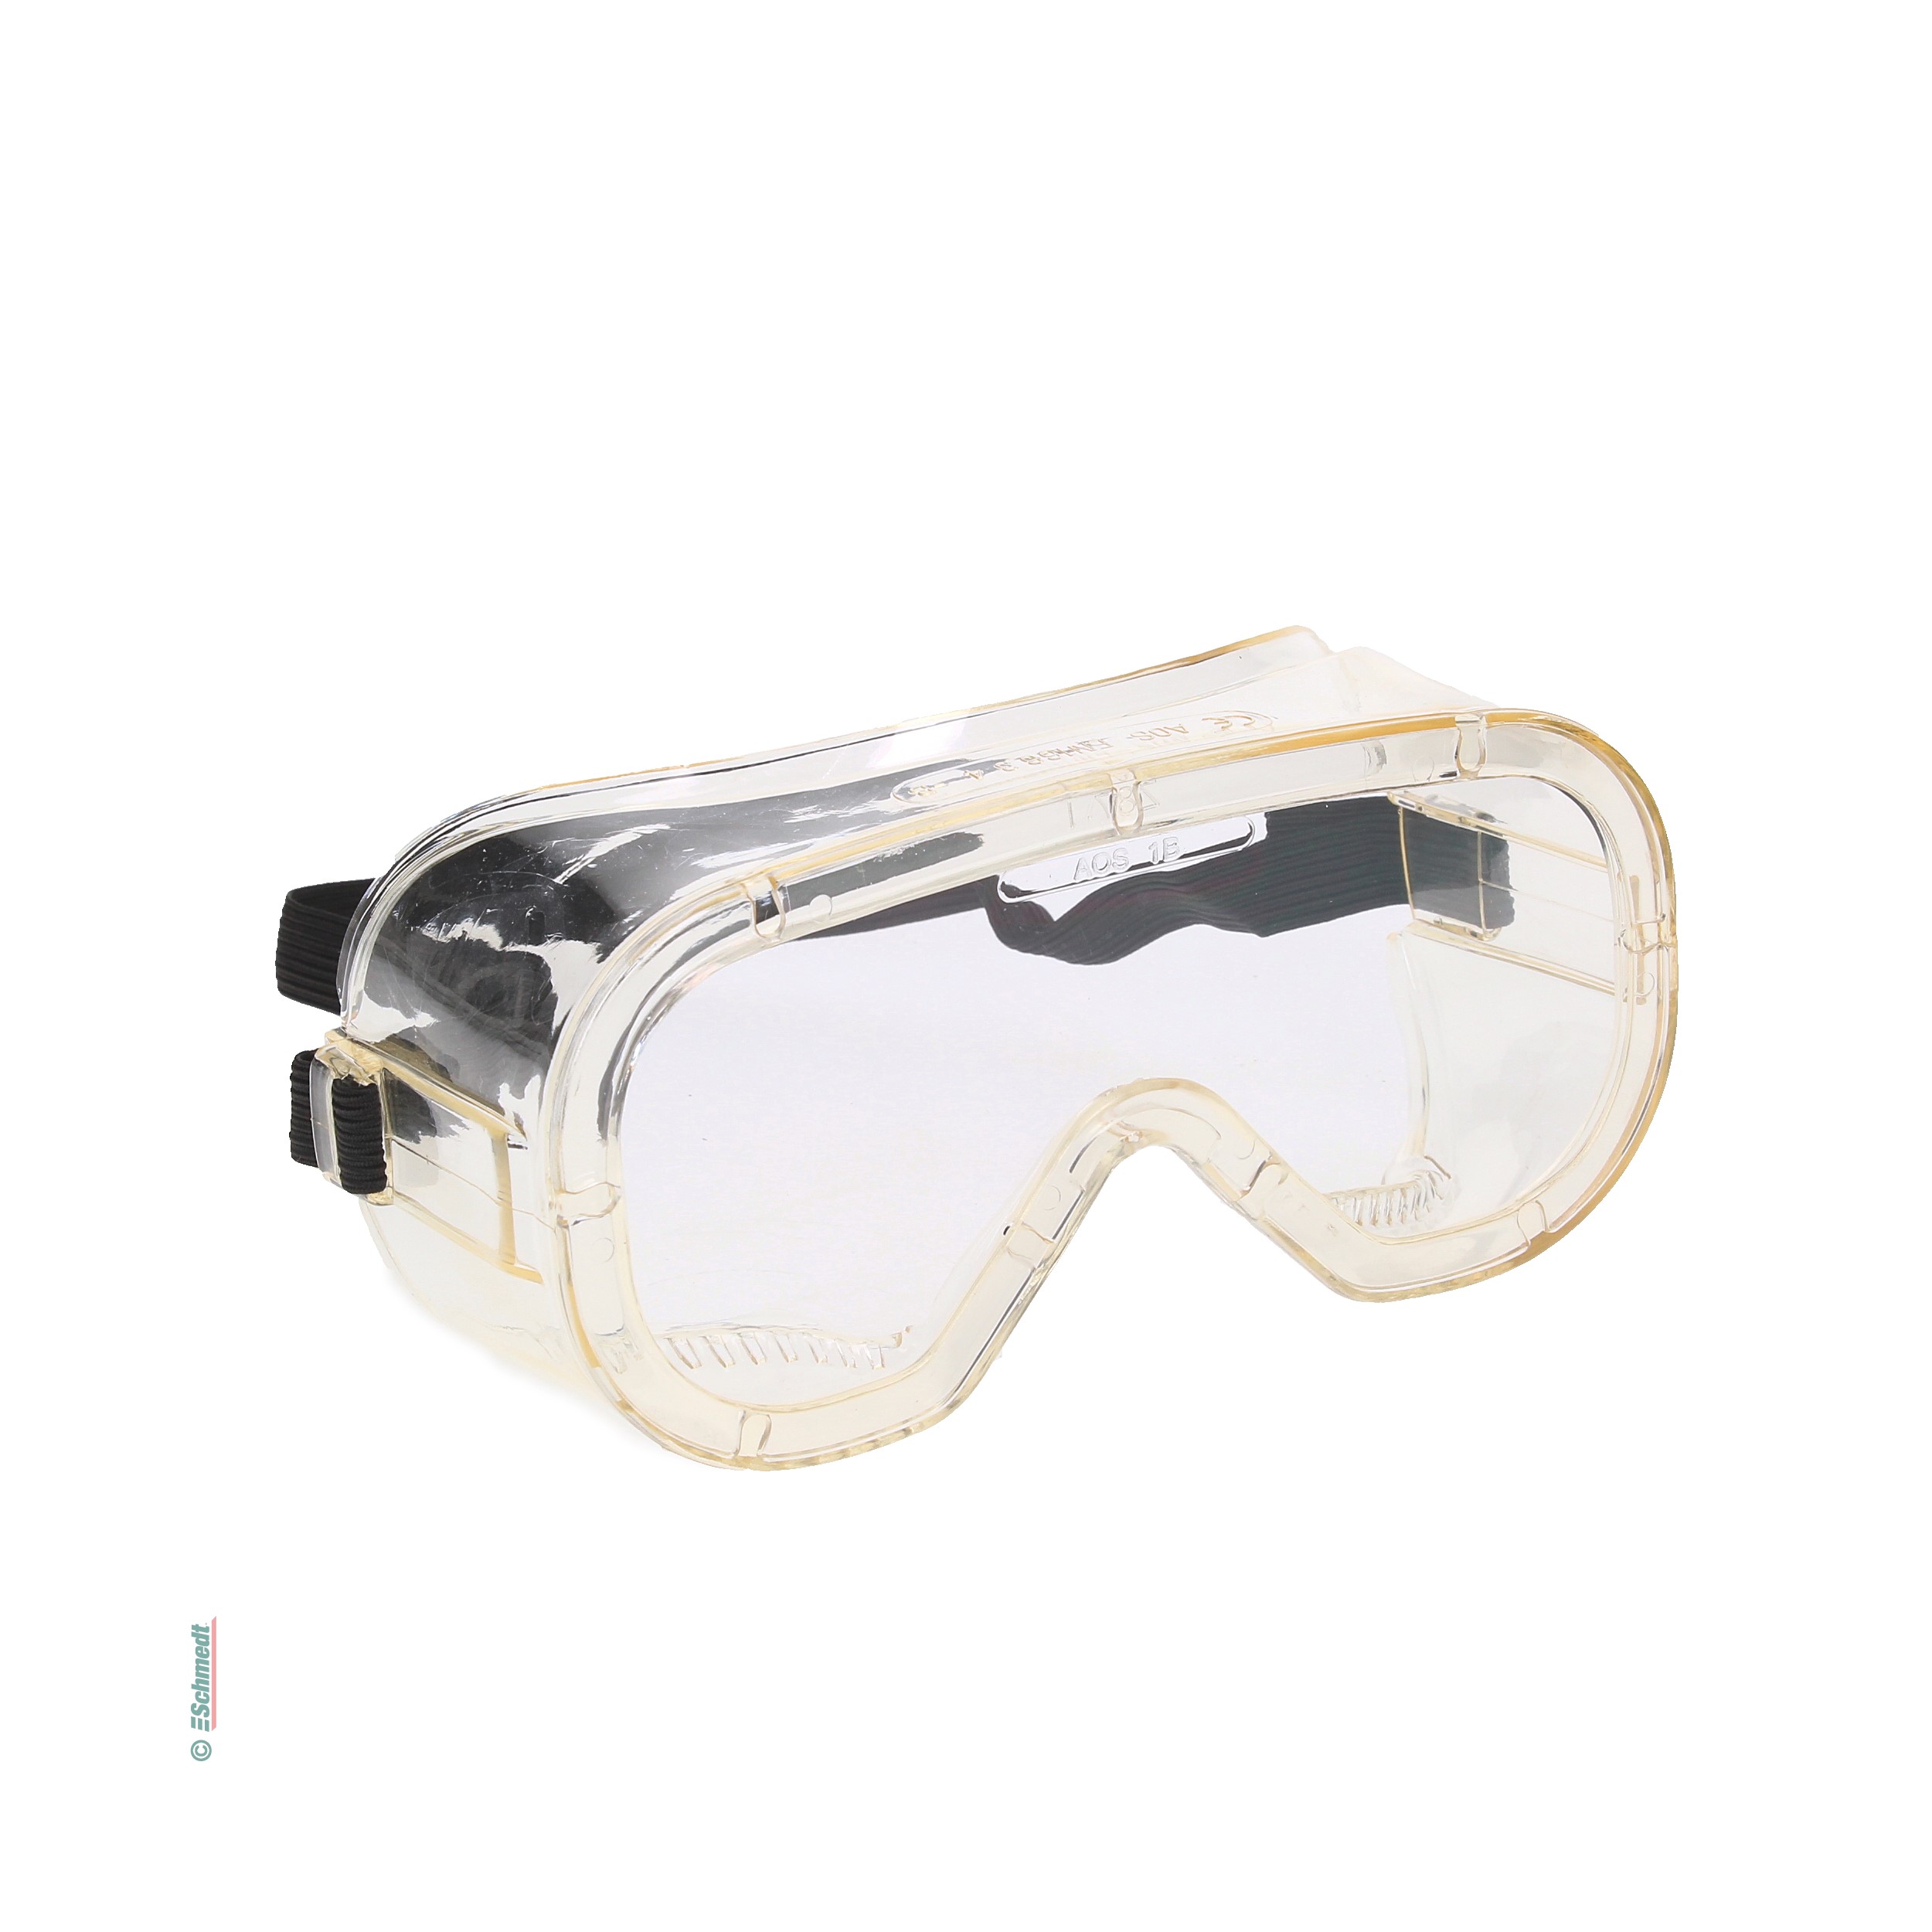 Goggles (full sight) - with indirect airing - protects against chemicals, dust, splashes...